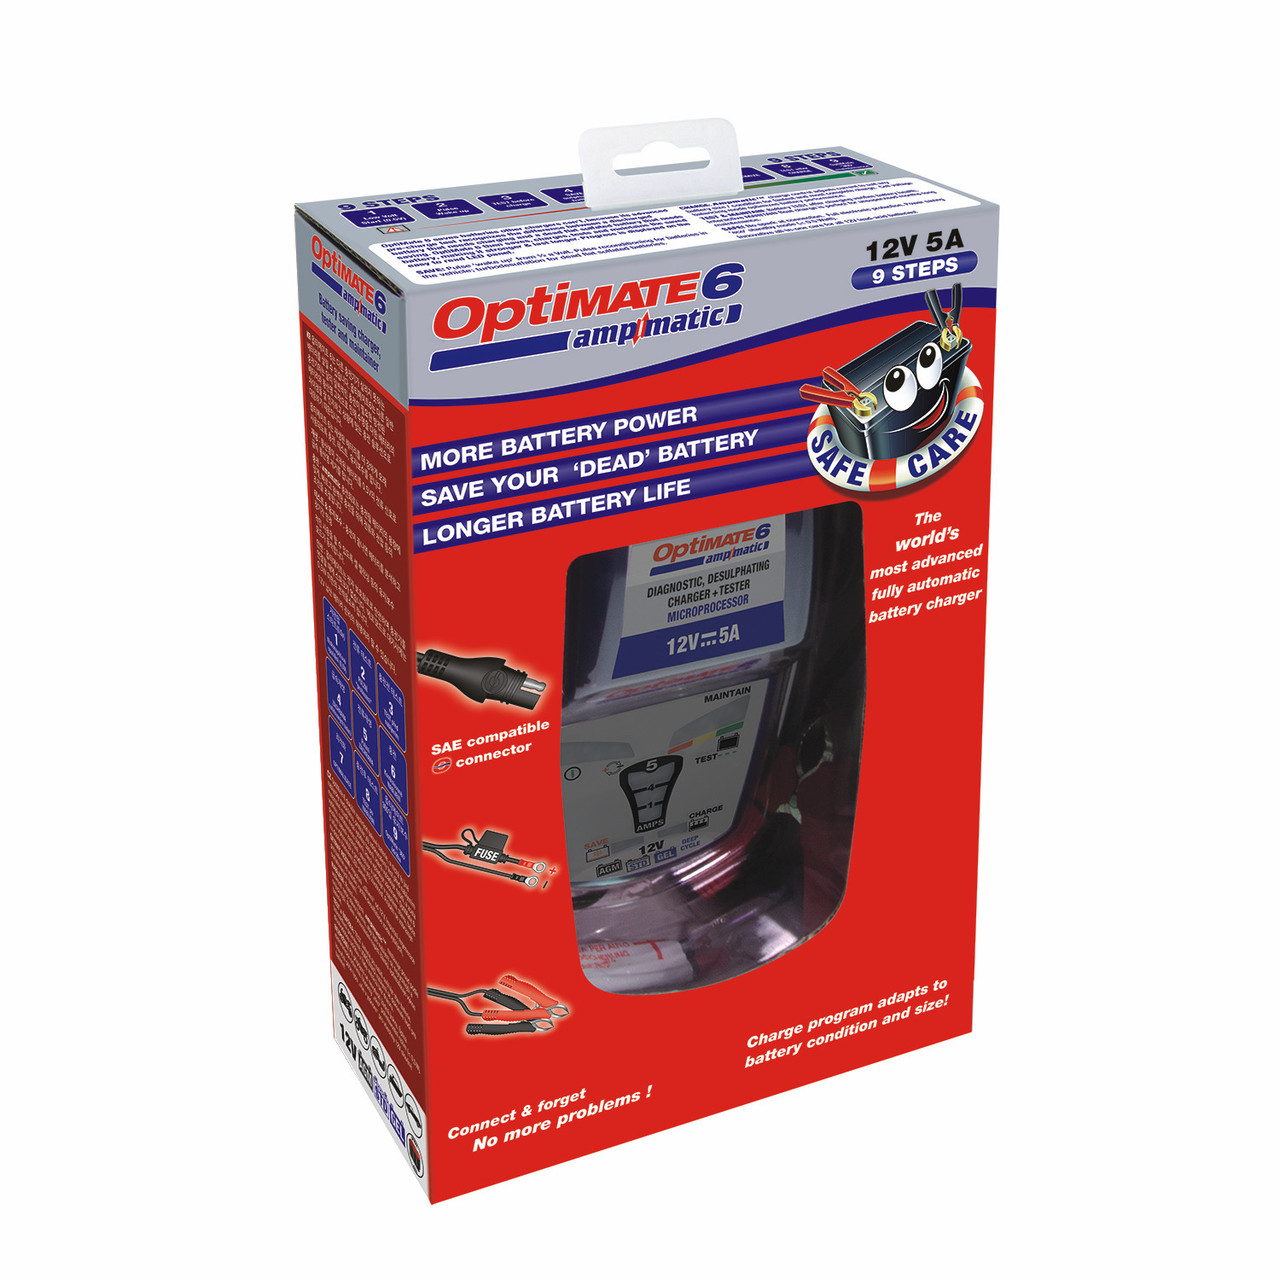 Optimate 6 Select - 12V 6A, TM-371, 9-Step Gold Series Battery Saving  Charger & maintainer